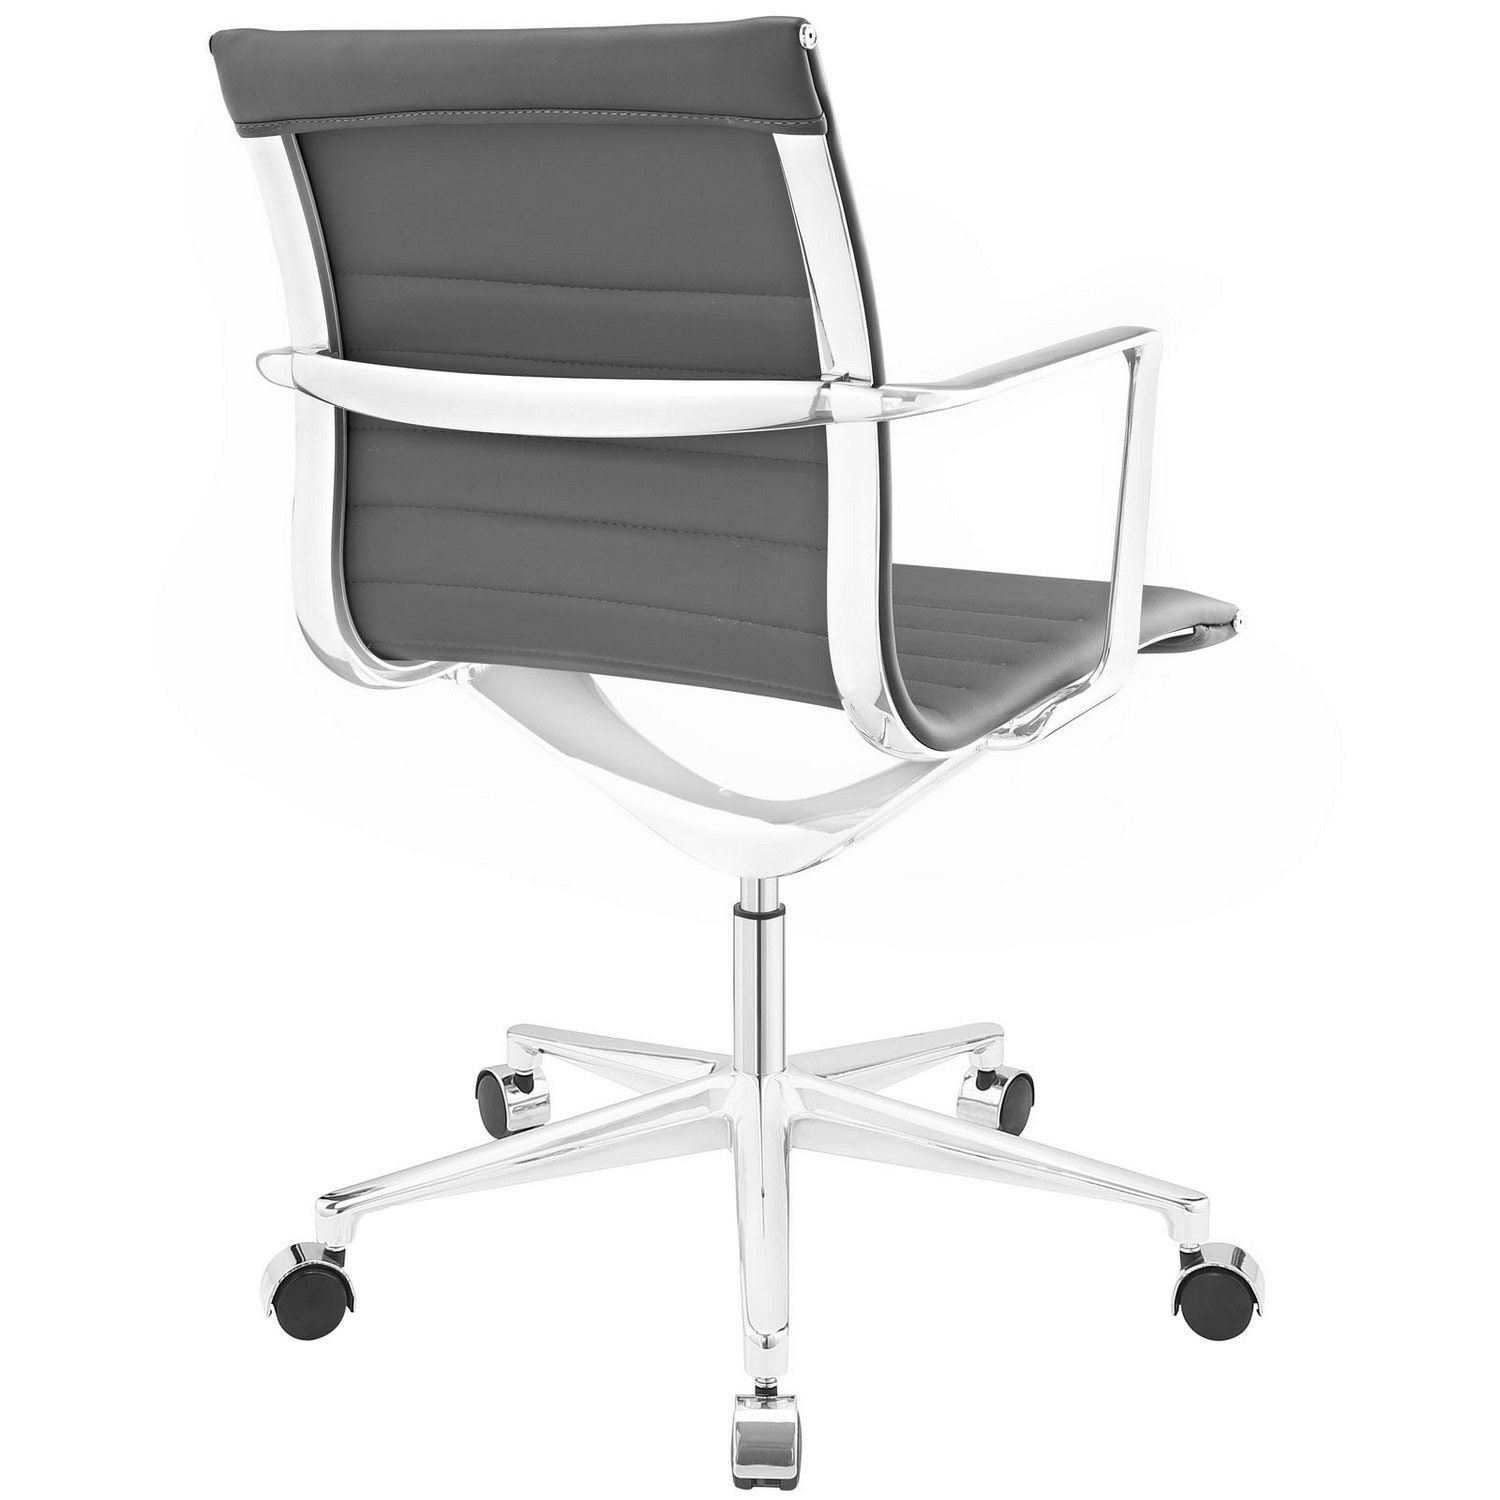 Modway Vi Mid Back Office Chair - Gray